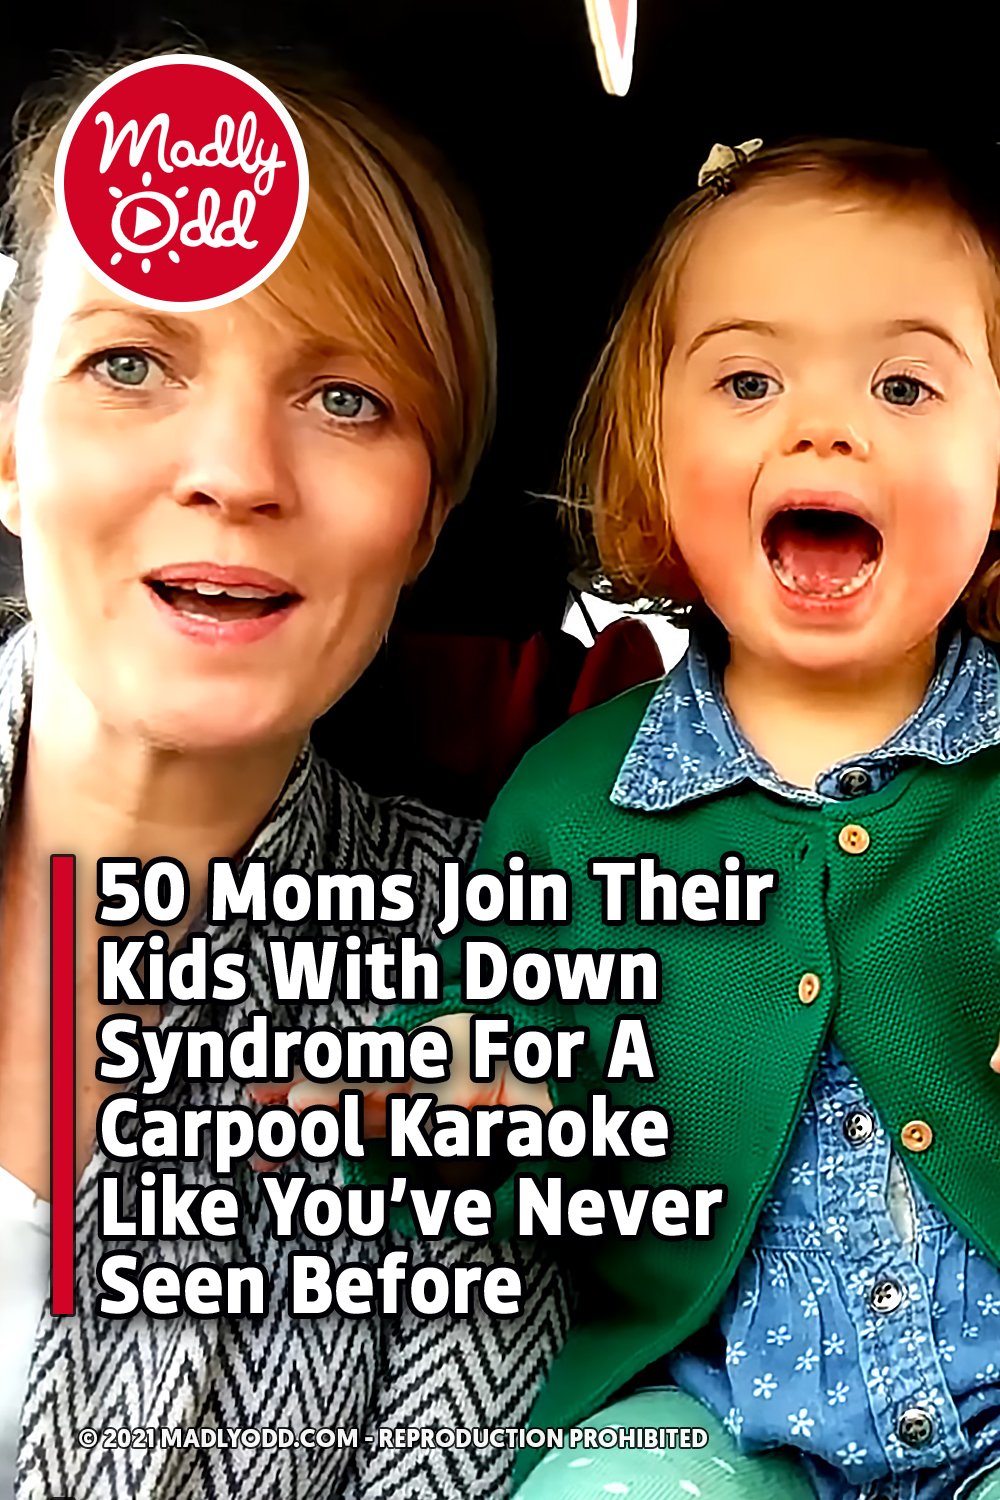 50 Moms Join Their Kids With Down Syndrome For A Carpool Karaoke Like You’ve Never Seen Before